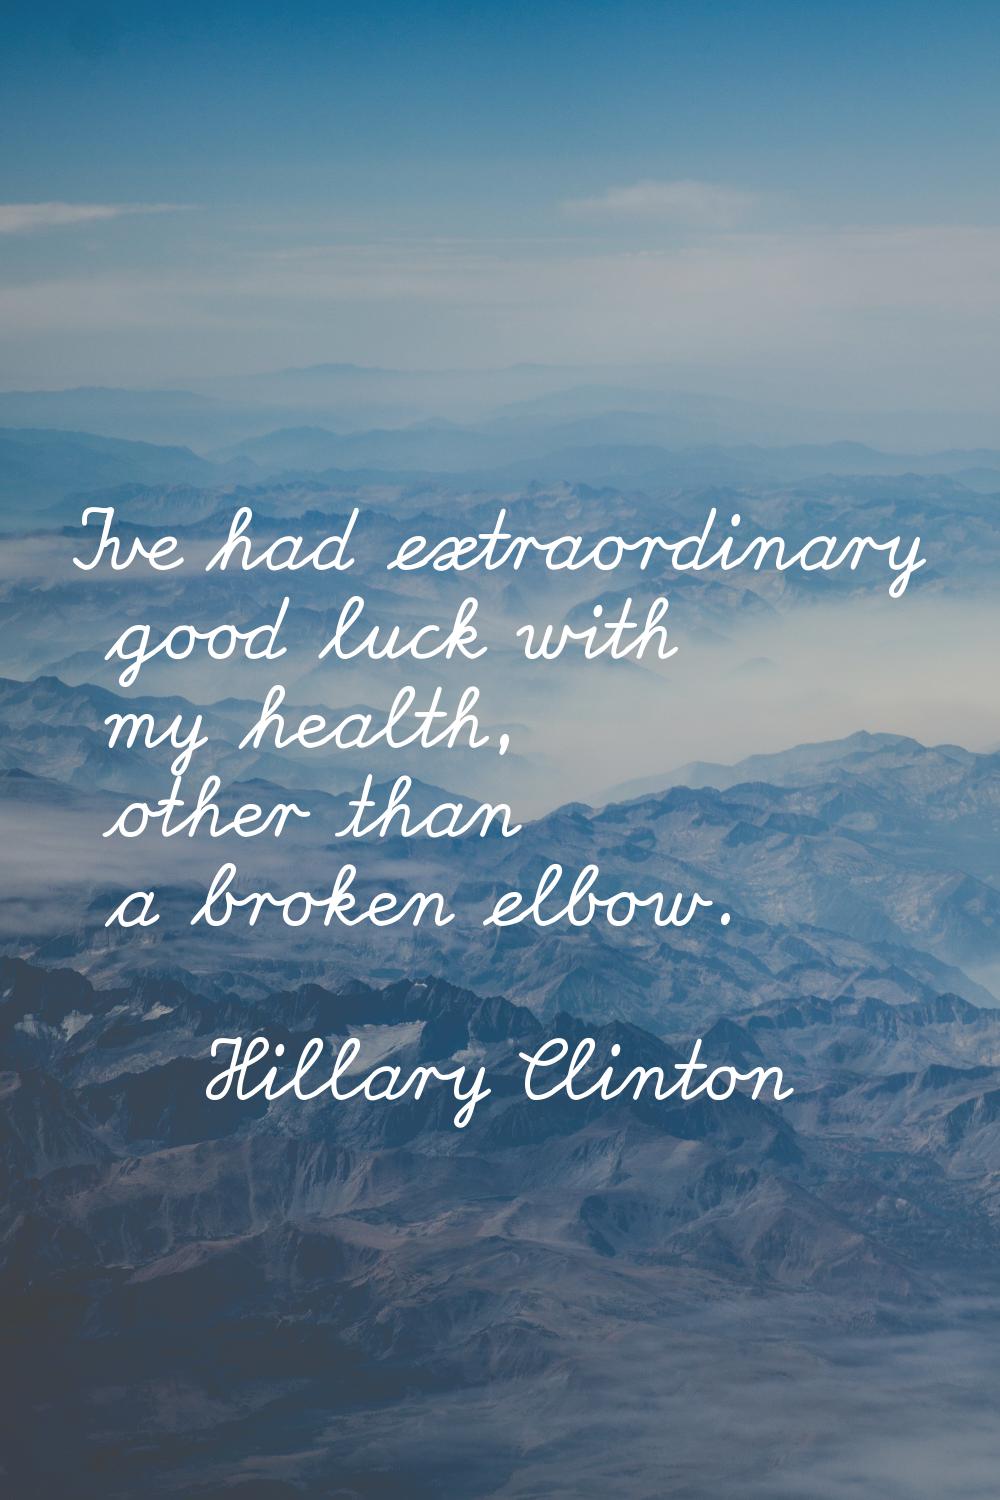 I've had extraordinary good luck with my health, other than a broken elbow.